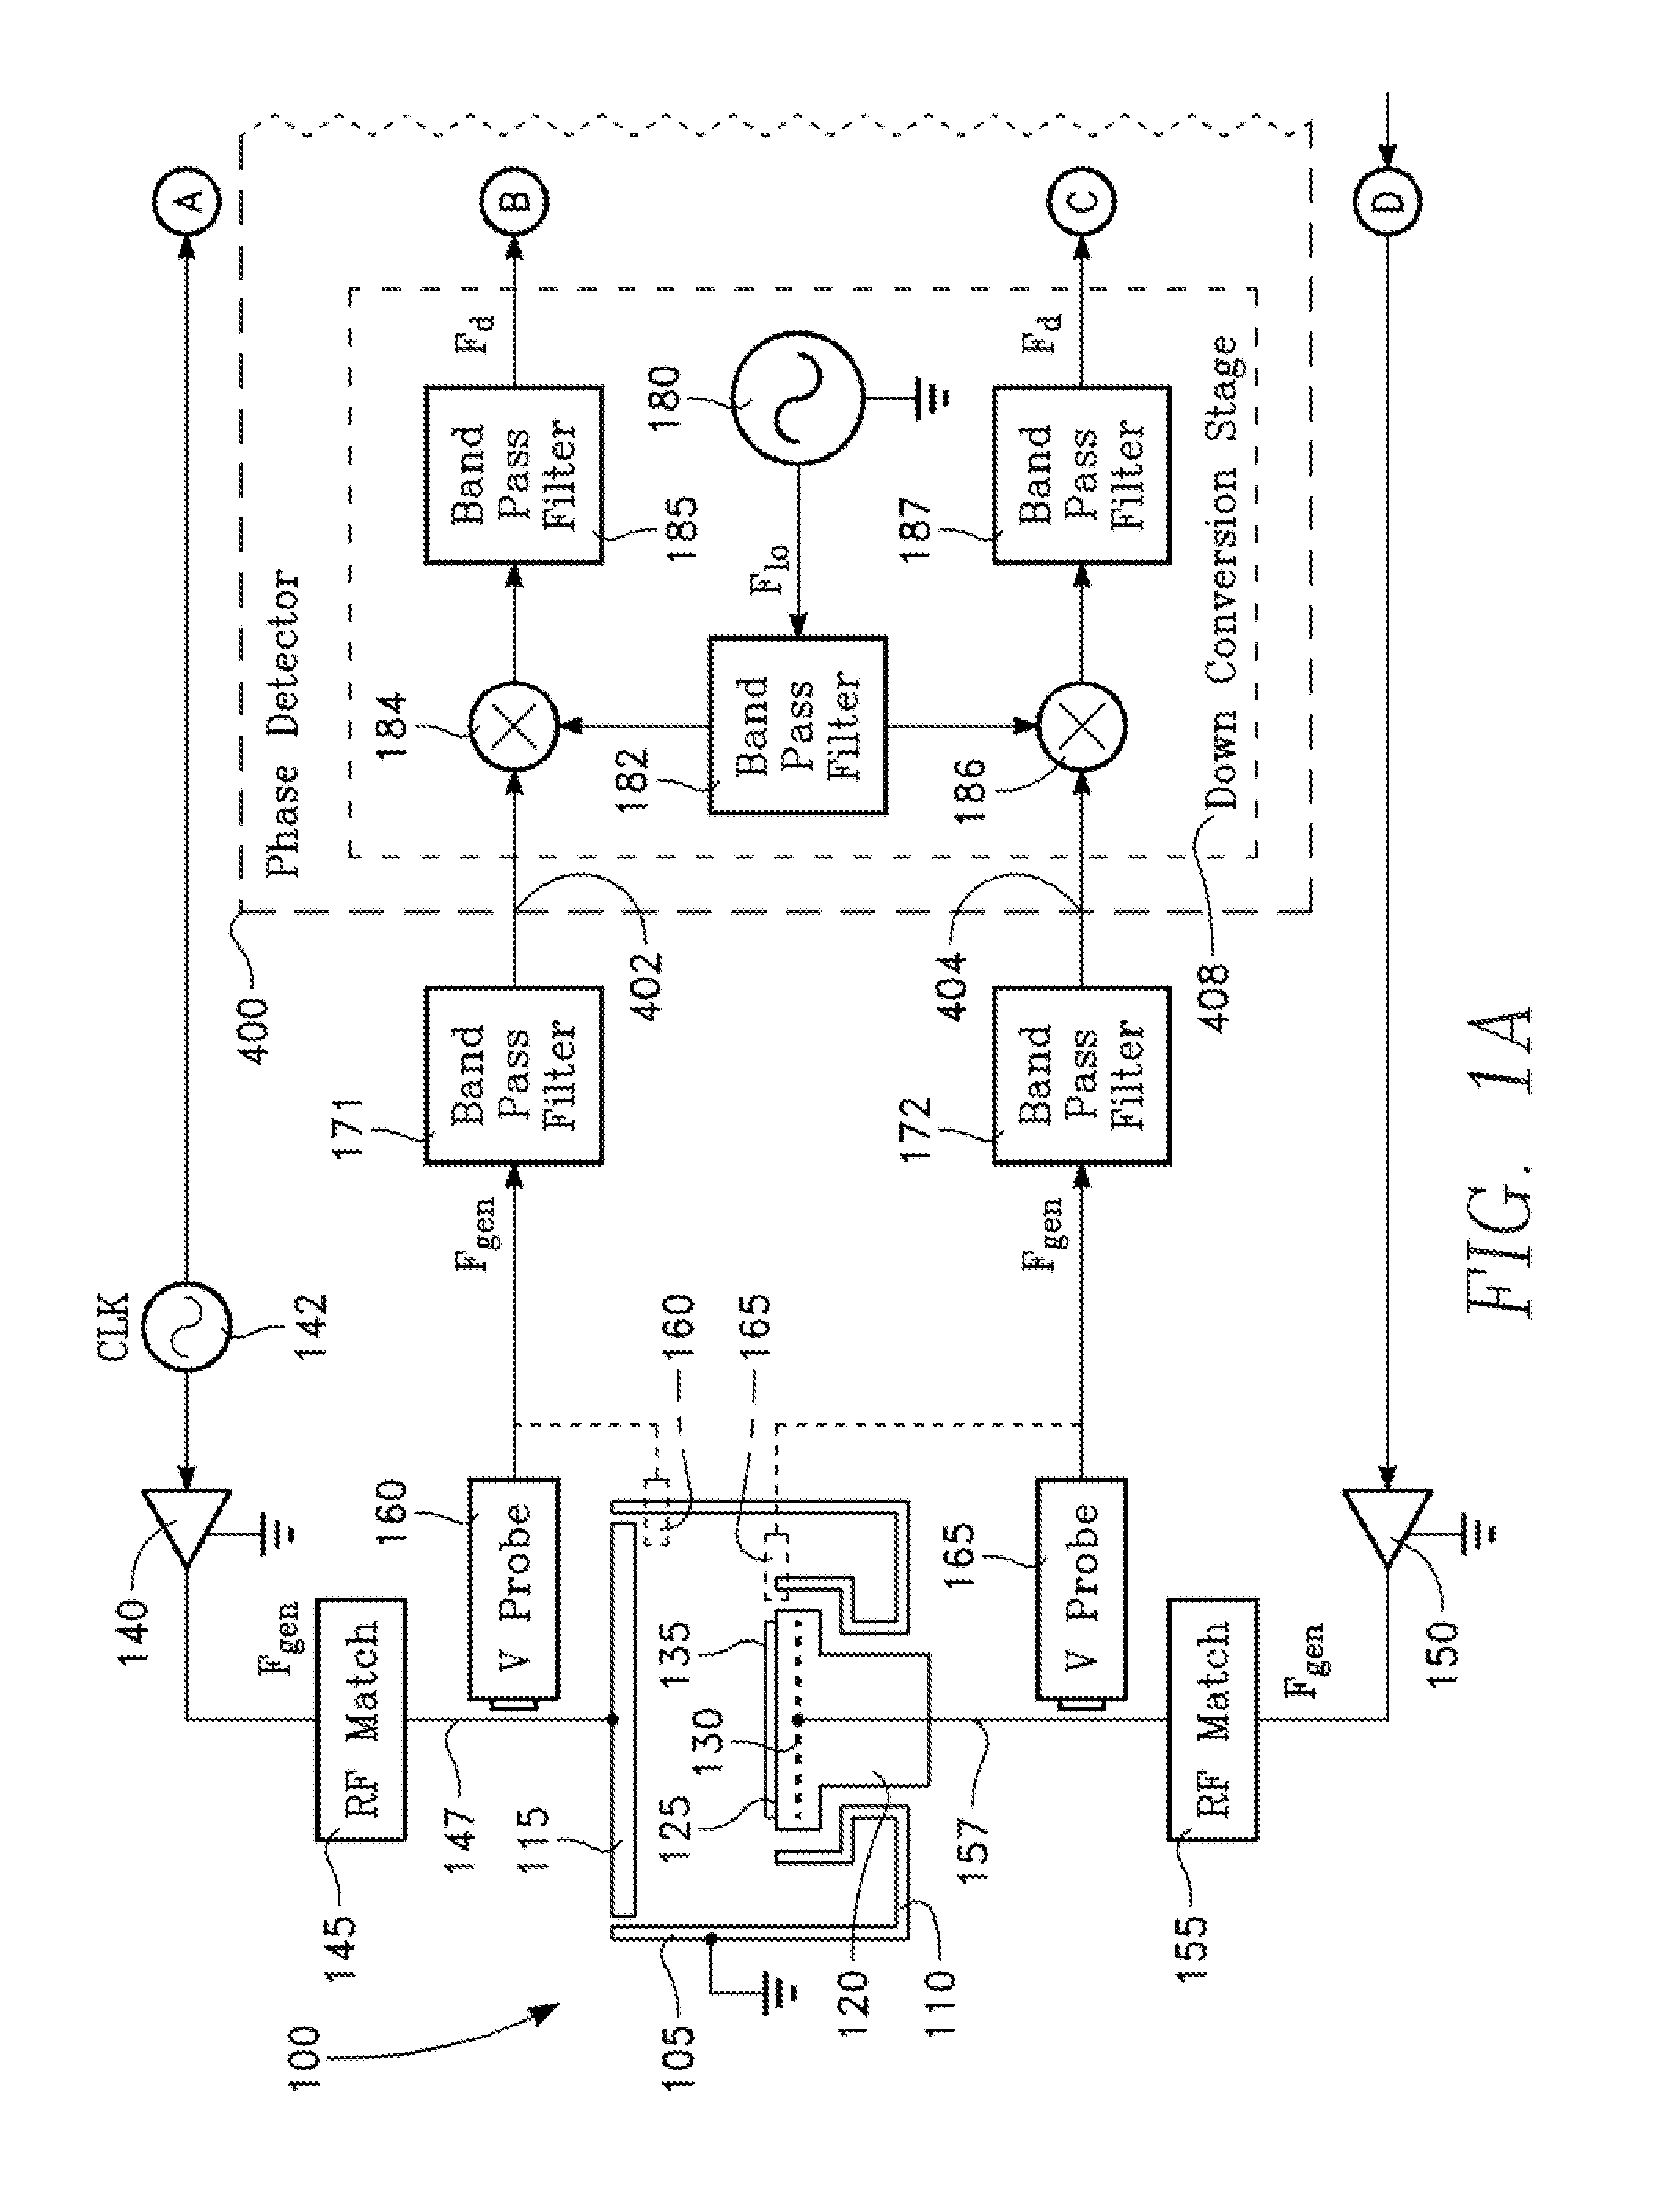 Two-phase operation of plasma chamber by phase locked loop